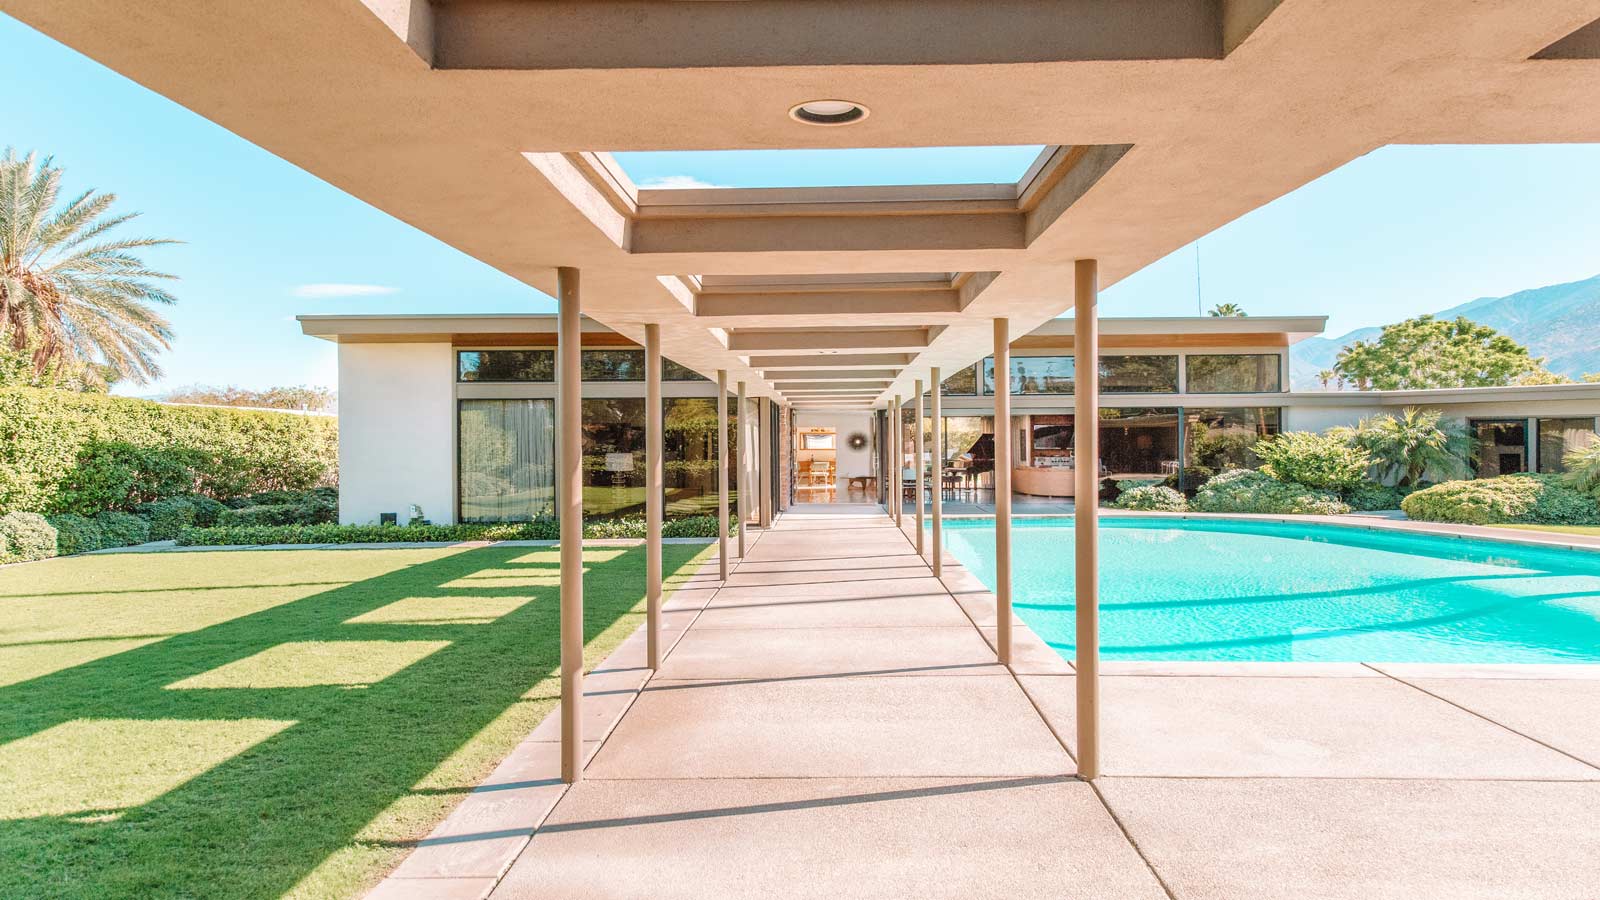 <p><span>You must take advantage of the home tour with Palm Springs <a href="https://www.psmodsquad.com/" rel="nofollow noopener">Mod Squad</a>. Explore the mid-century grandeur of butterfly rooflines, colorful front doors, and A-frame facades in the Mod Squad van and learn the history of this desert oasis and the celebrities who made it their vacation getaway. </span></p><p><span>Visitors can choose from three different options: the Essential Palm Springs Tour focuses on six specific architects of this minimalist design, the Interior Tour takes you into three mid-century Palm Springs houses, or the Martini & MCM Architecture Tour and see the former homes of Frank Sinatra, Marilyn Monroe, and Dean Martin, ending with a classic martini (and if you’re lucky you’ll get to sit in Old Blue Eye’s booth)!</span></p>